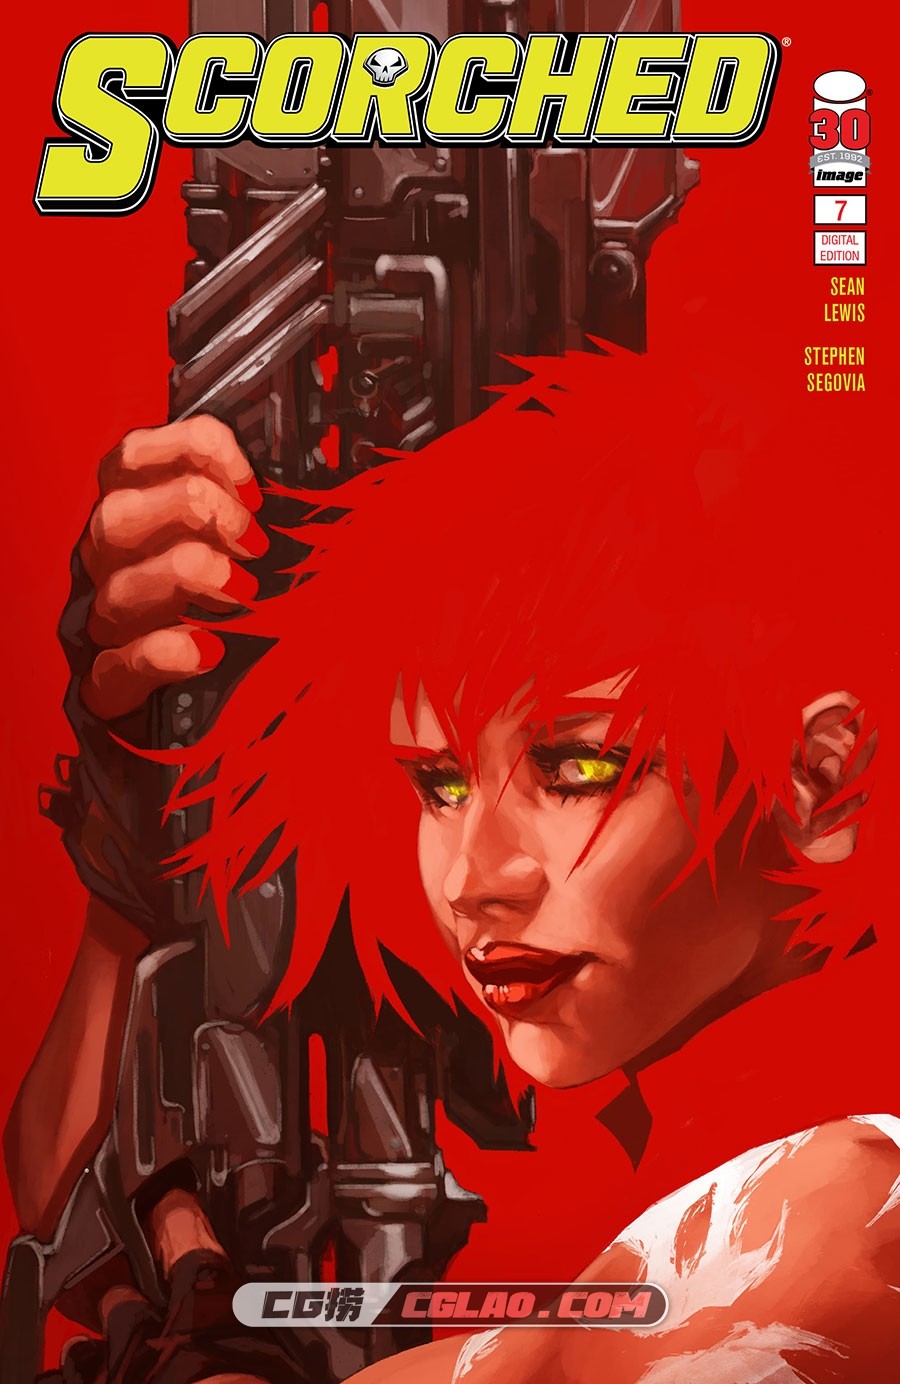 The Scorched 007 (2022) 2 covers Digital Empire 漫画 百度网盘下载,The-Scorched-007-000a.jpg